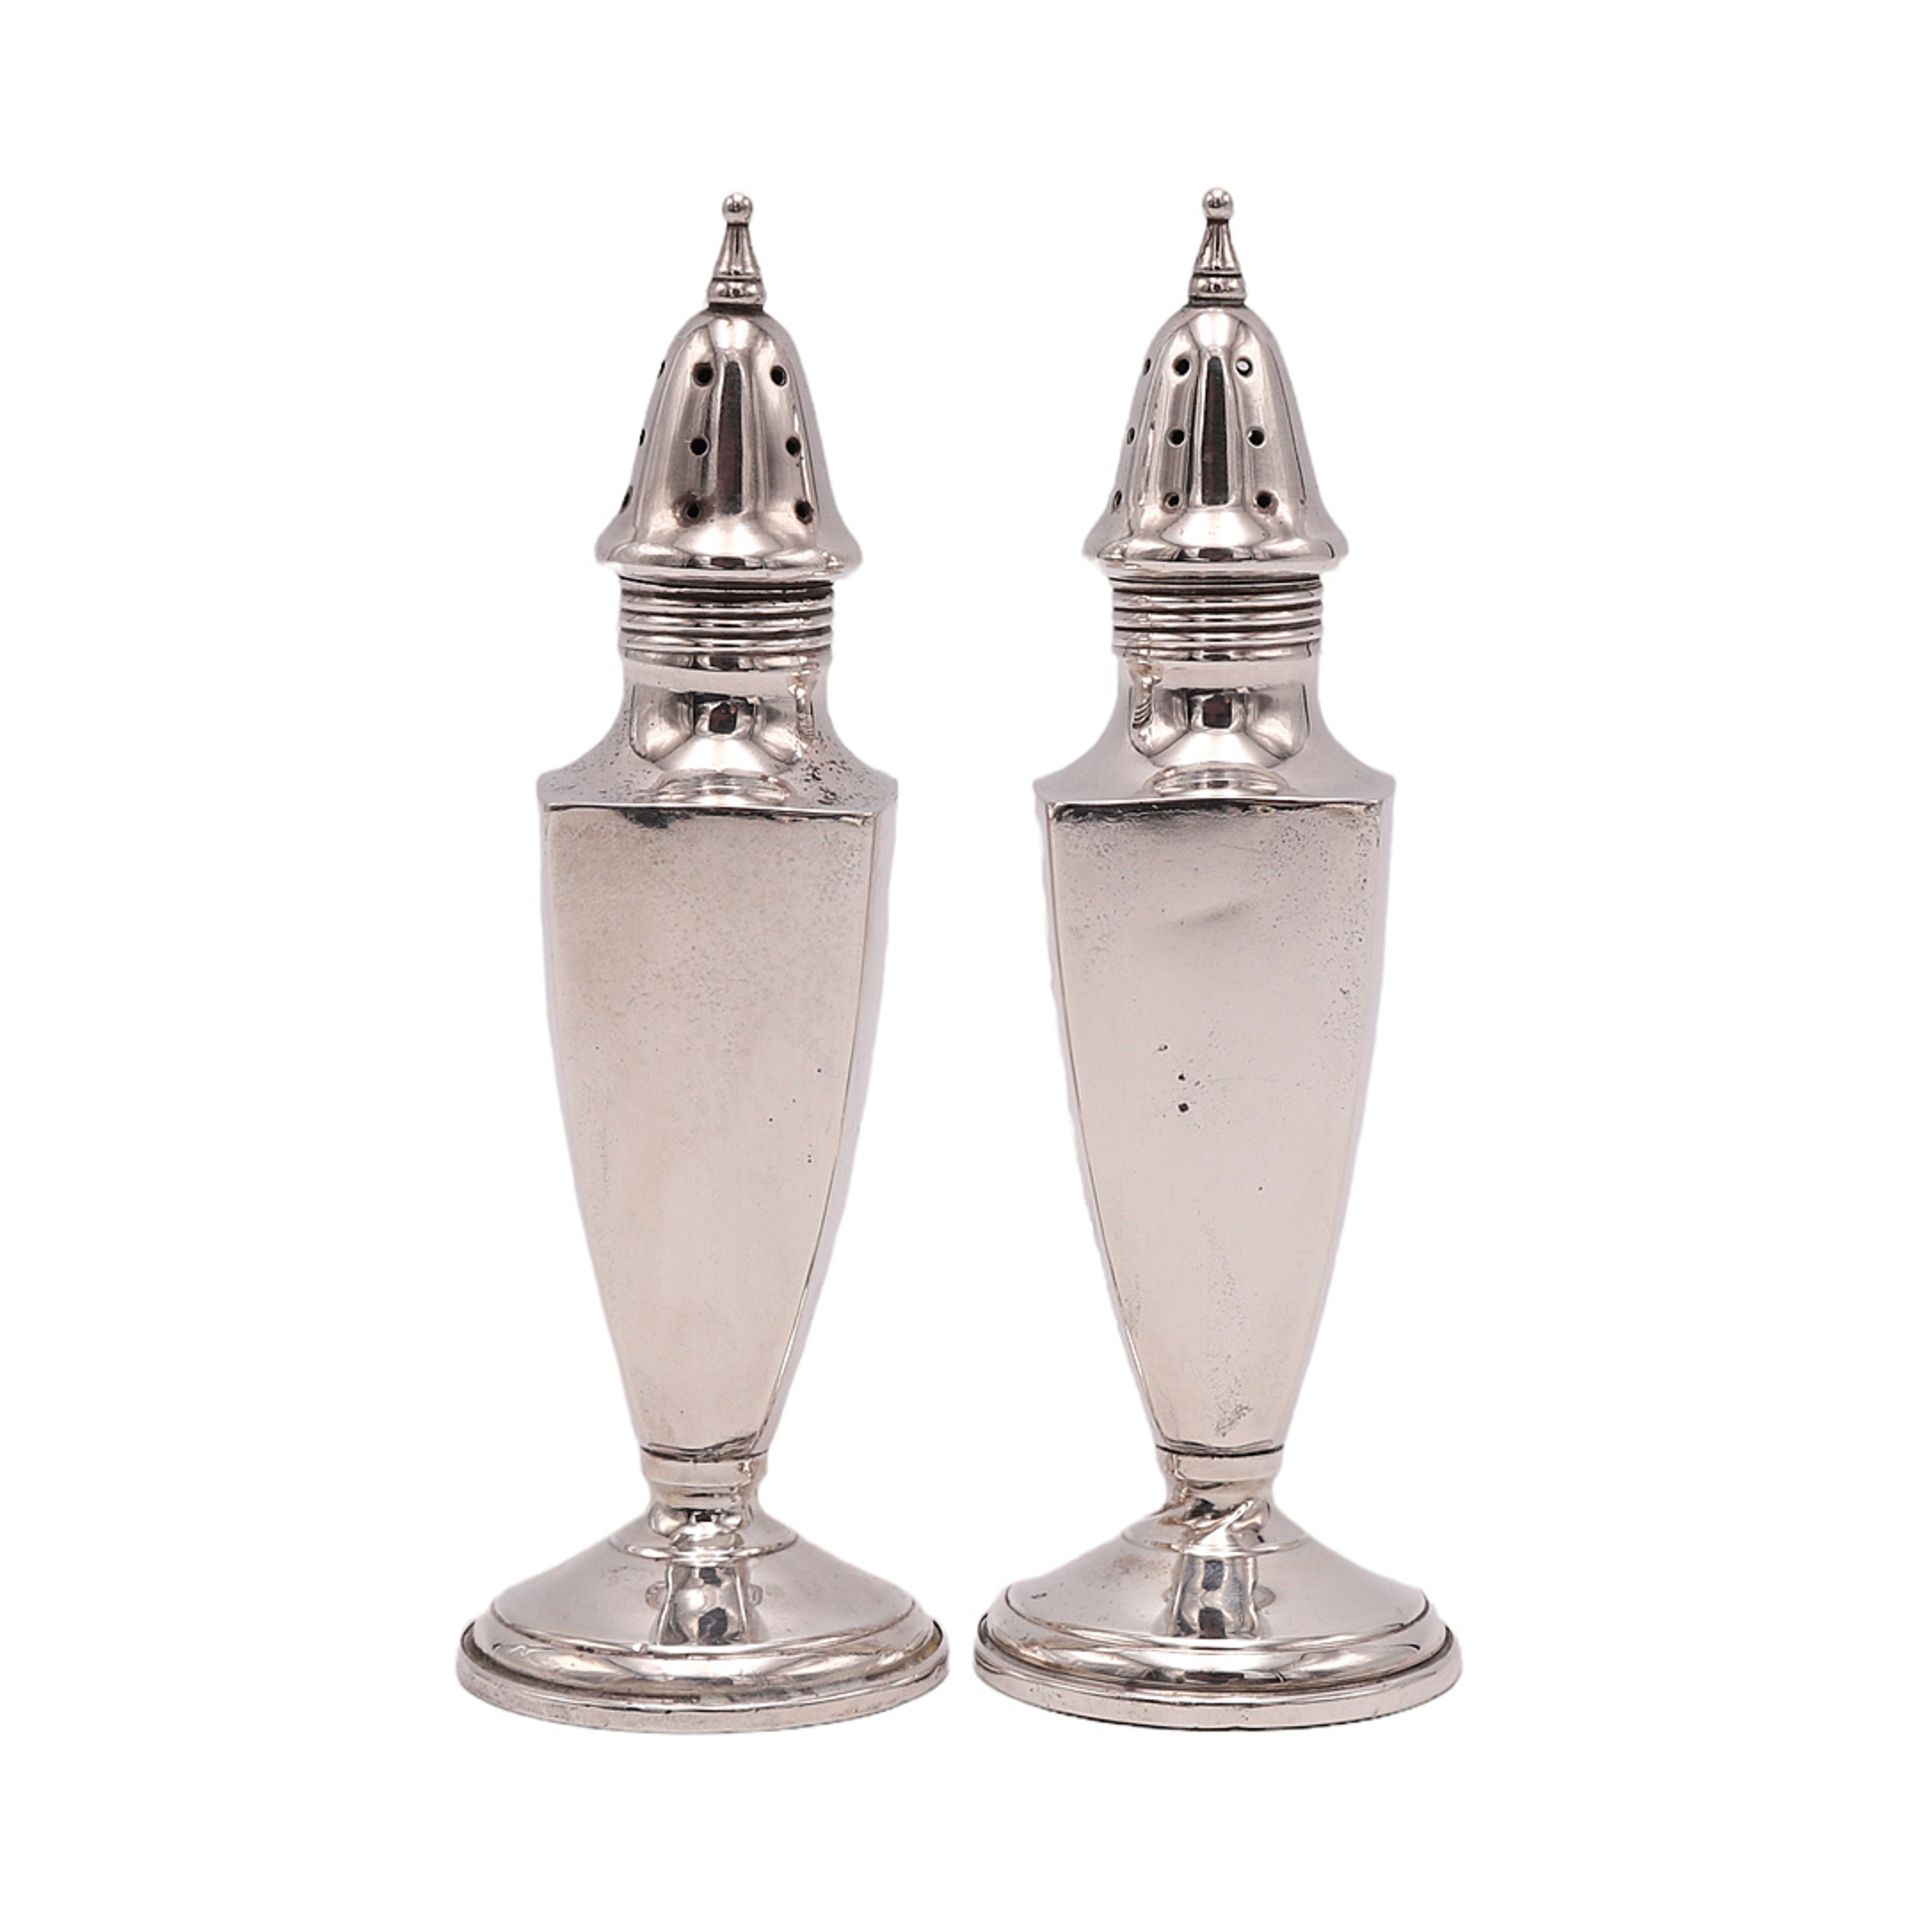 Pair of spice shakers, North America, 20th century - Image 2 of 3